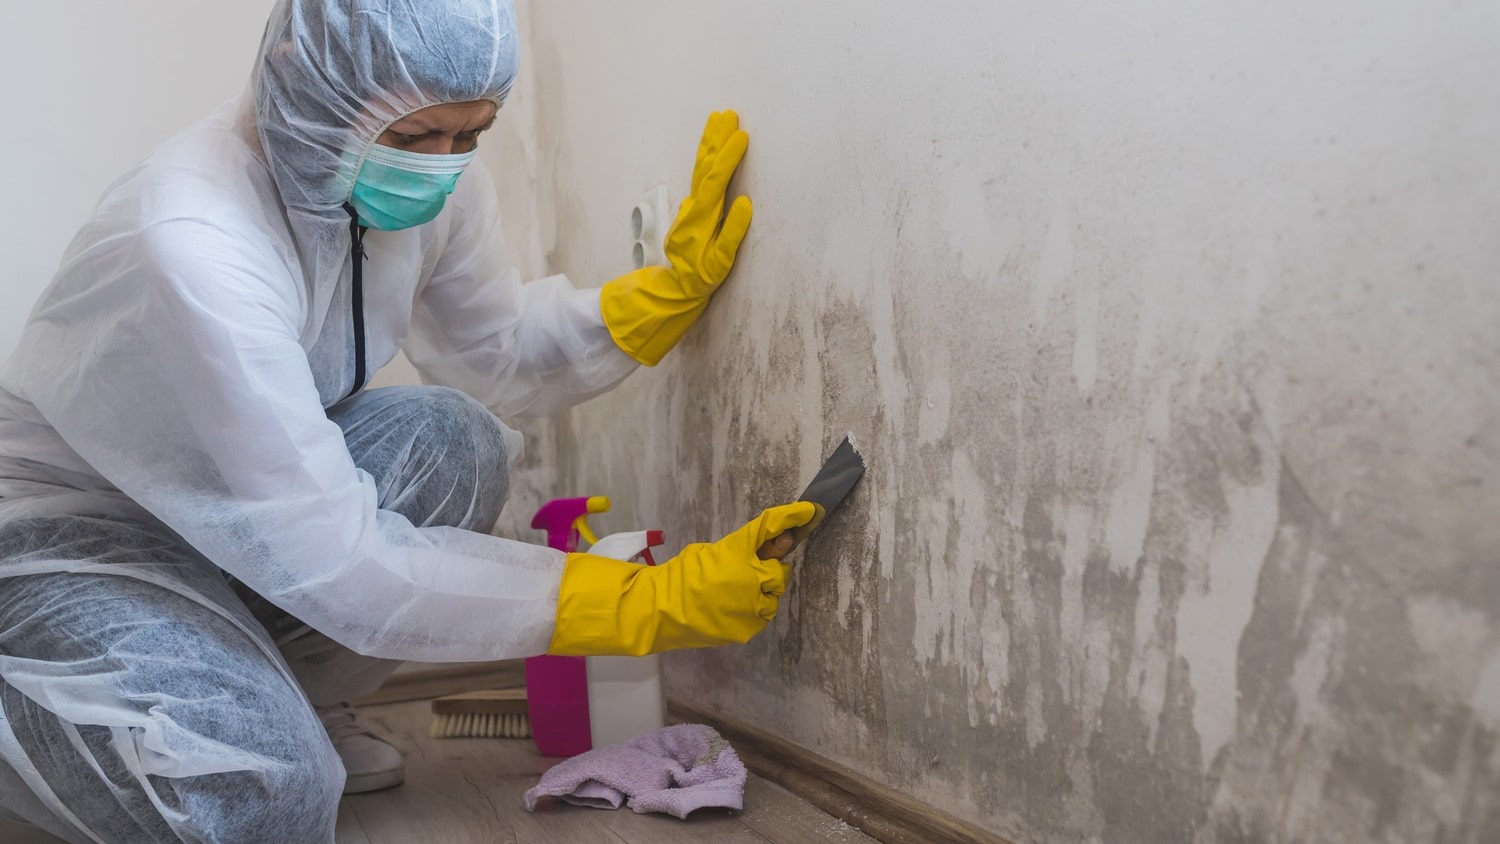 A close-up photo of a person wearing protective gloves and using a brush to remove mold from a wall.